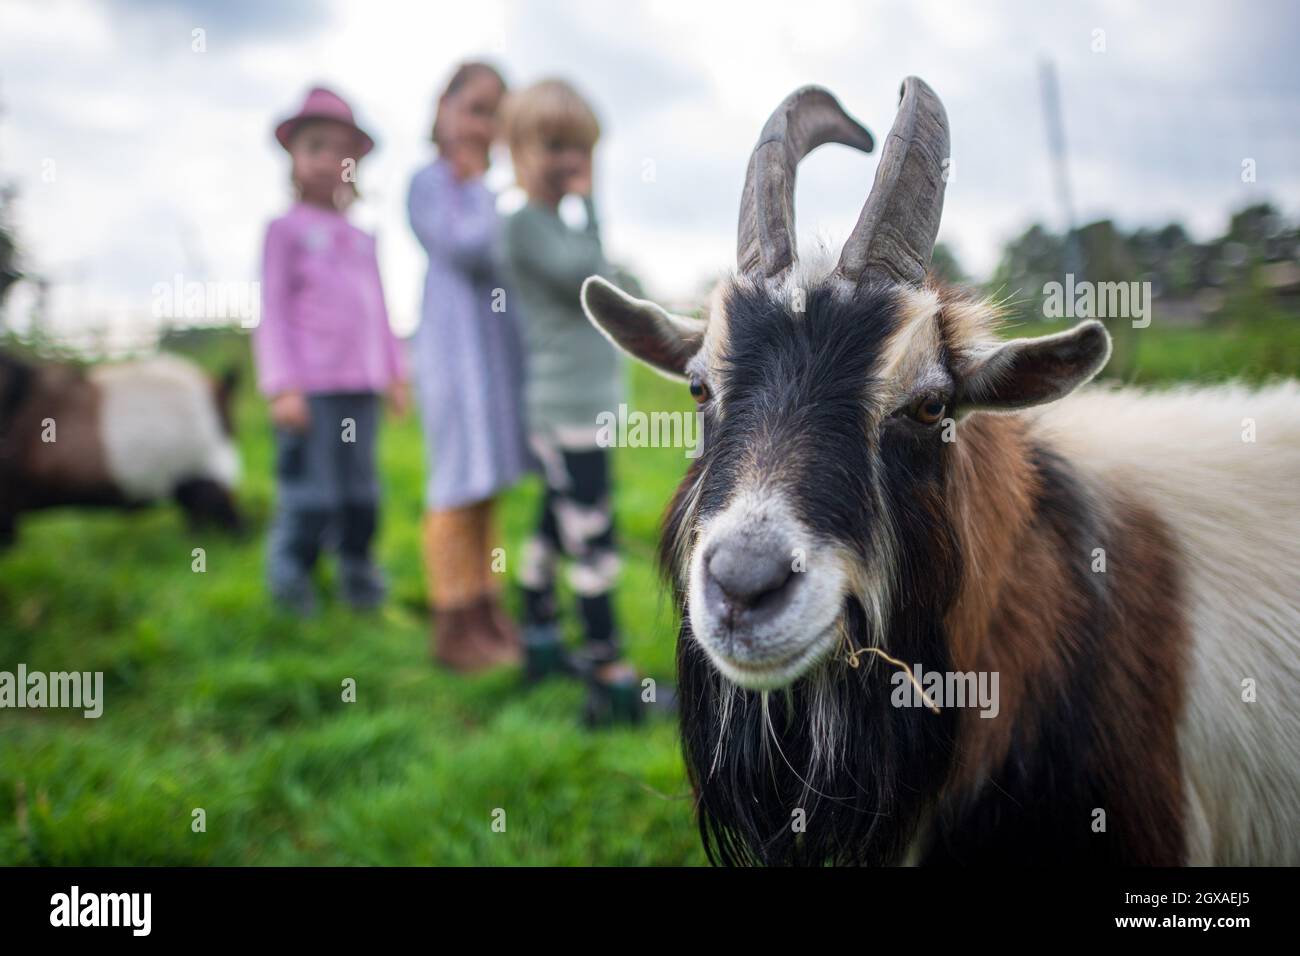 27 September 2021, Lower Saxony, Löningen: Children look at the goats on a farm. Nature, animals and lots of fresh air - many families have spent their summer holidays on a holiday farm. Lower Saxony farms are also popular destinations for the coming autumn holidays. Photo: Sina Schuldt/dpa Stock Photo